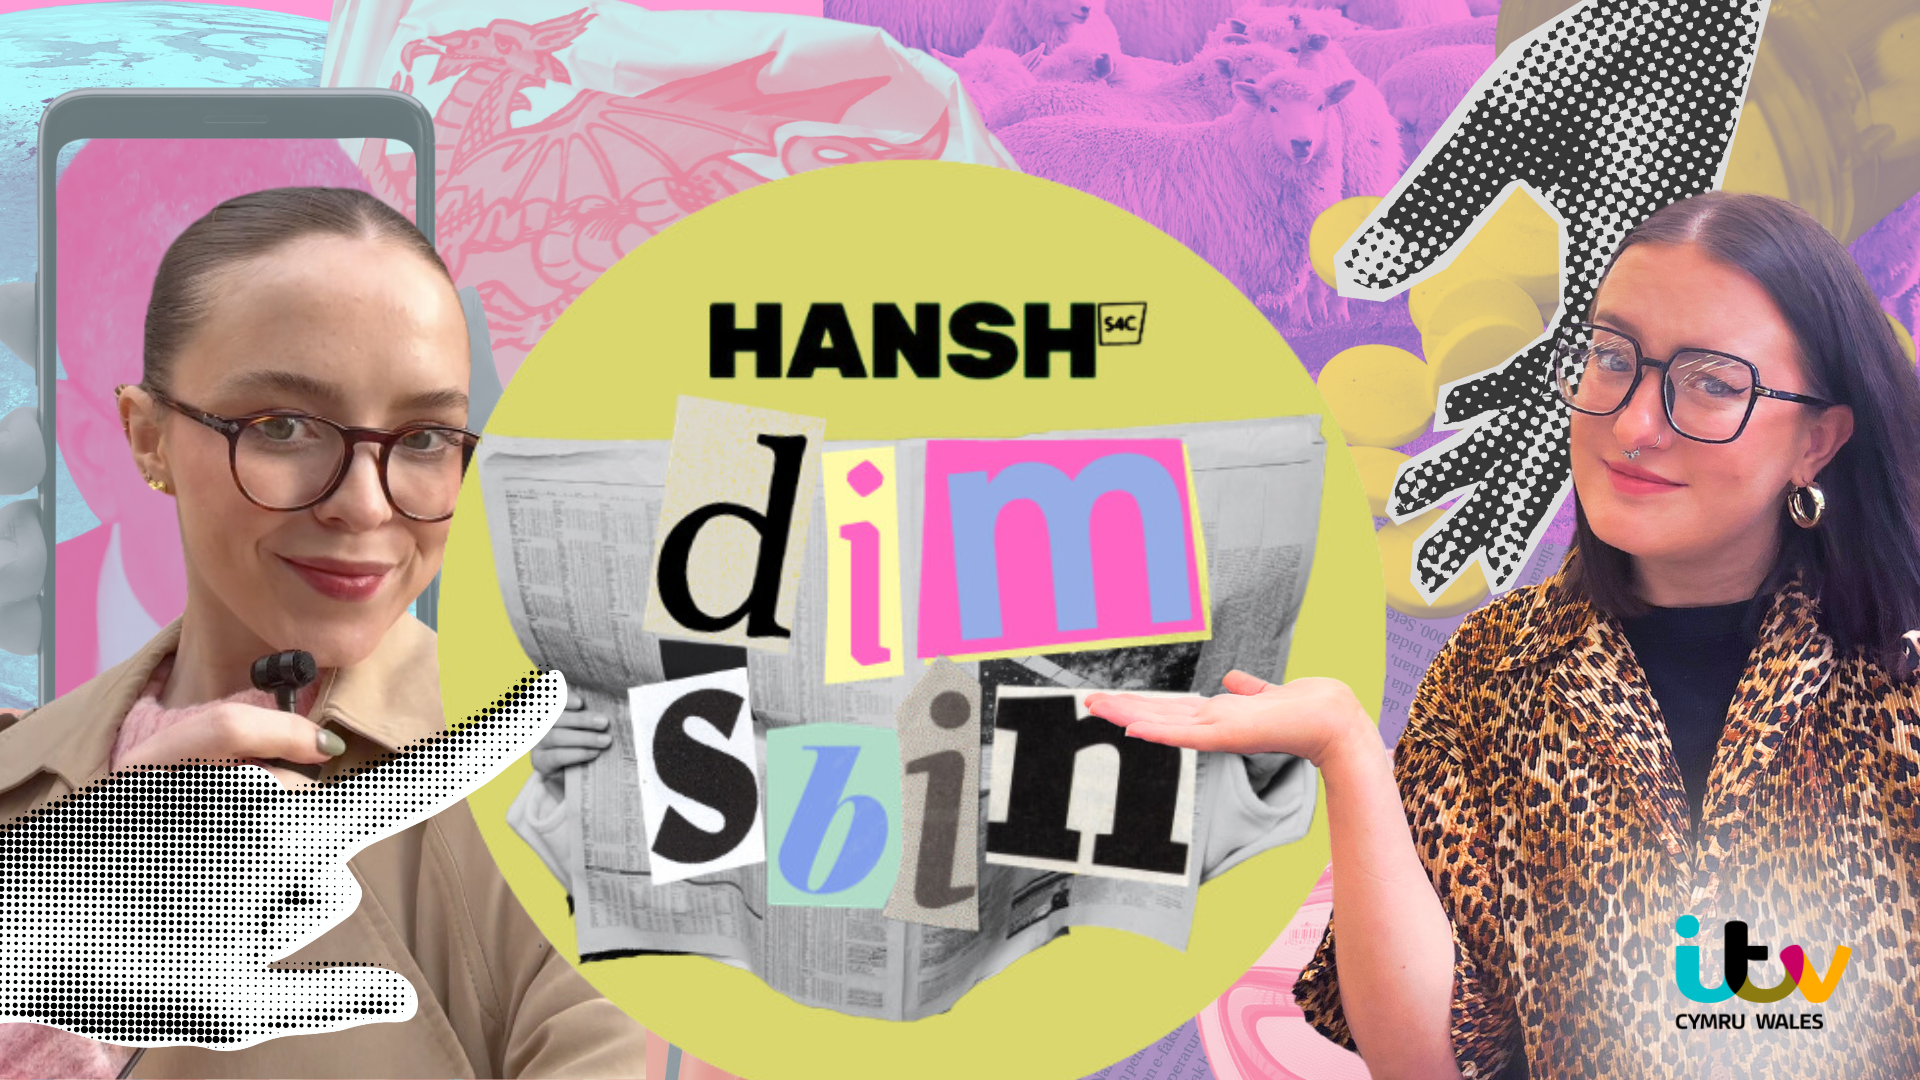 Two of out trainees and a brand logo for hansh dim sbin